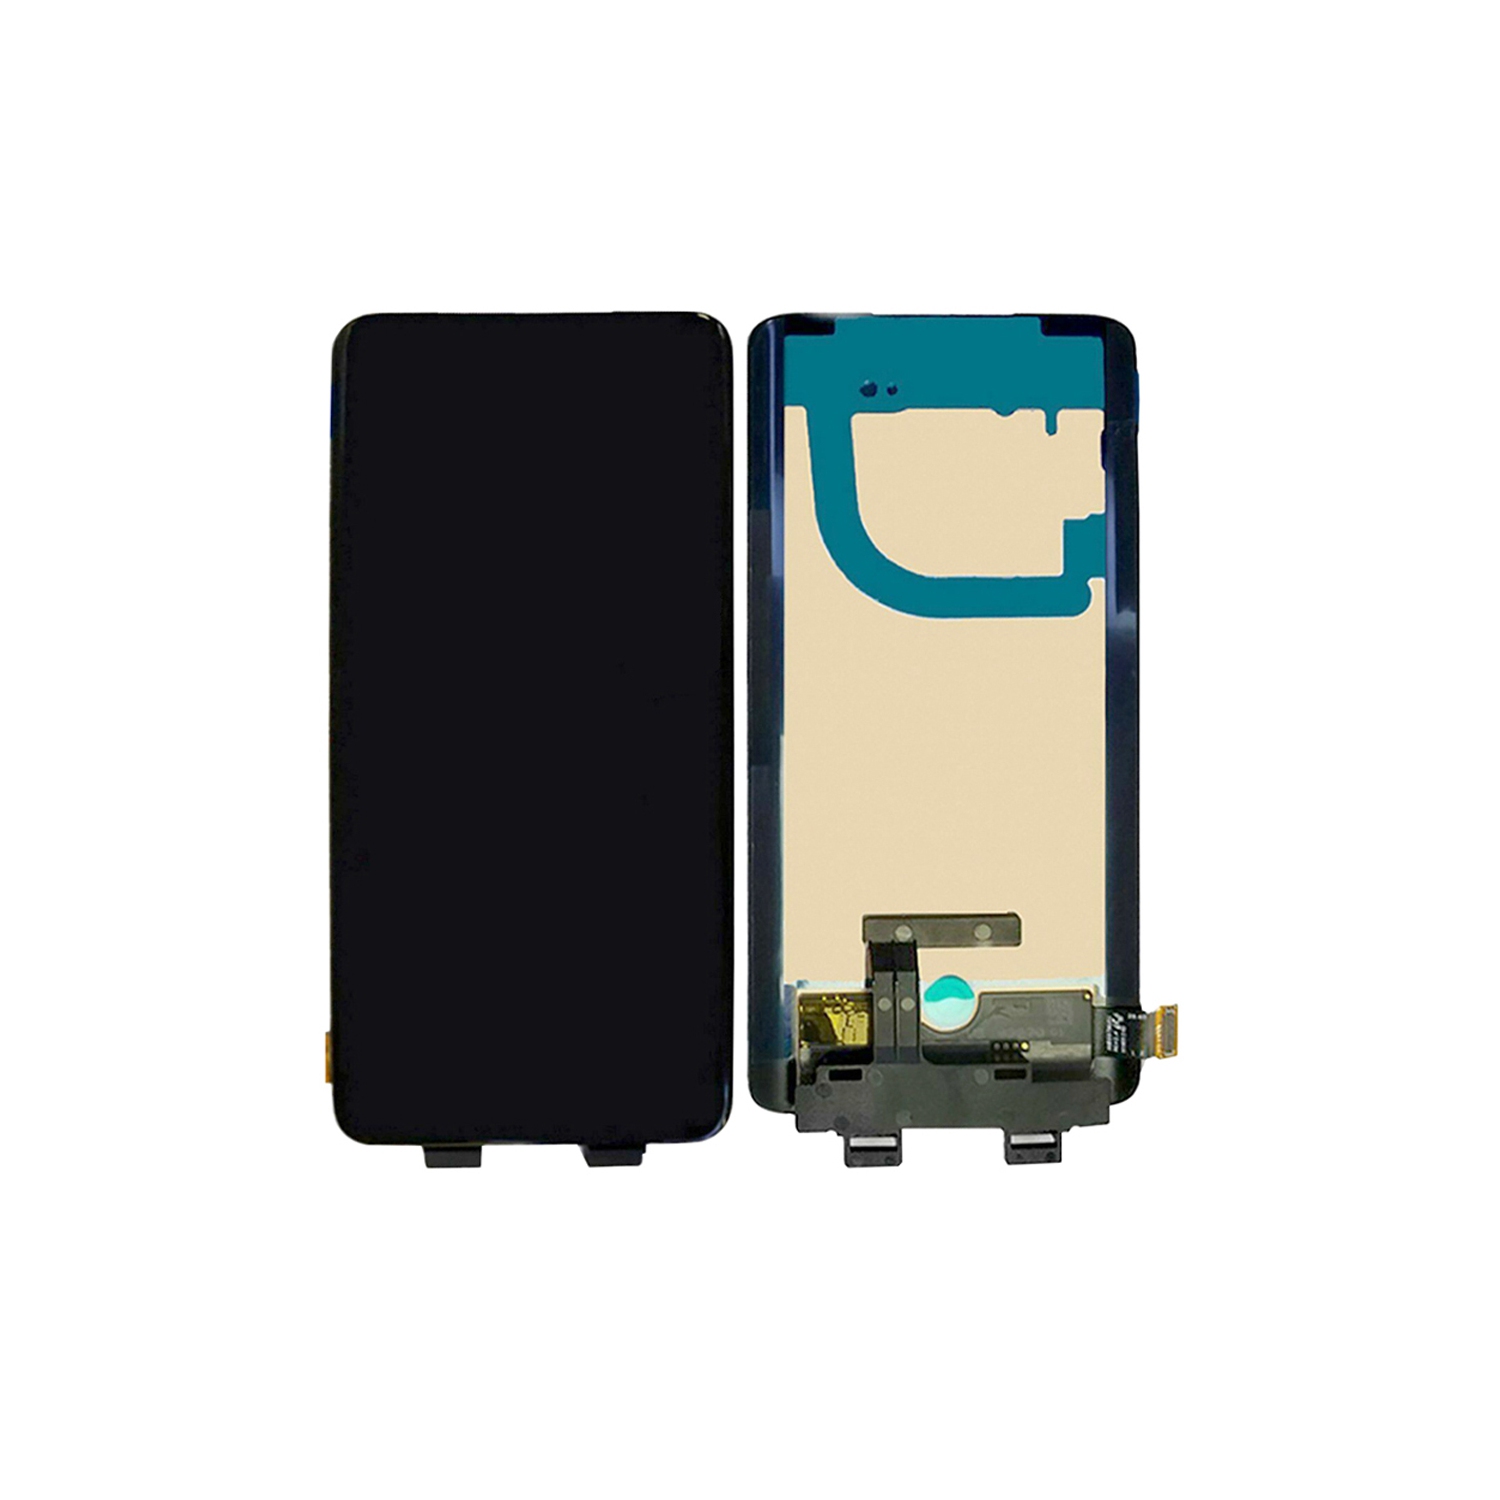 Replacement OLED Display Touch Screen Digitizer Assembly Compatible With OnePlus 7 Pro - Black